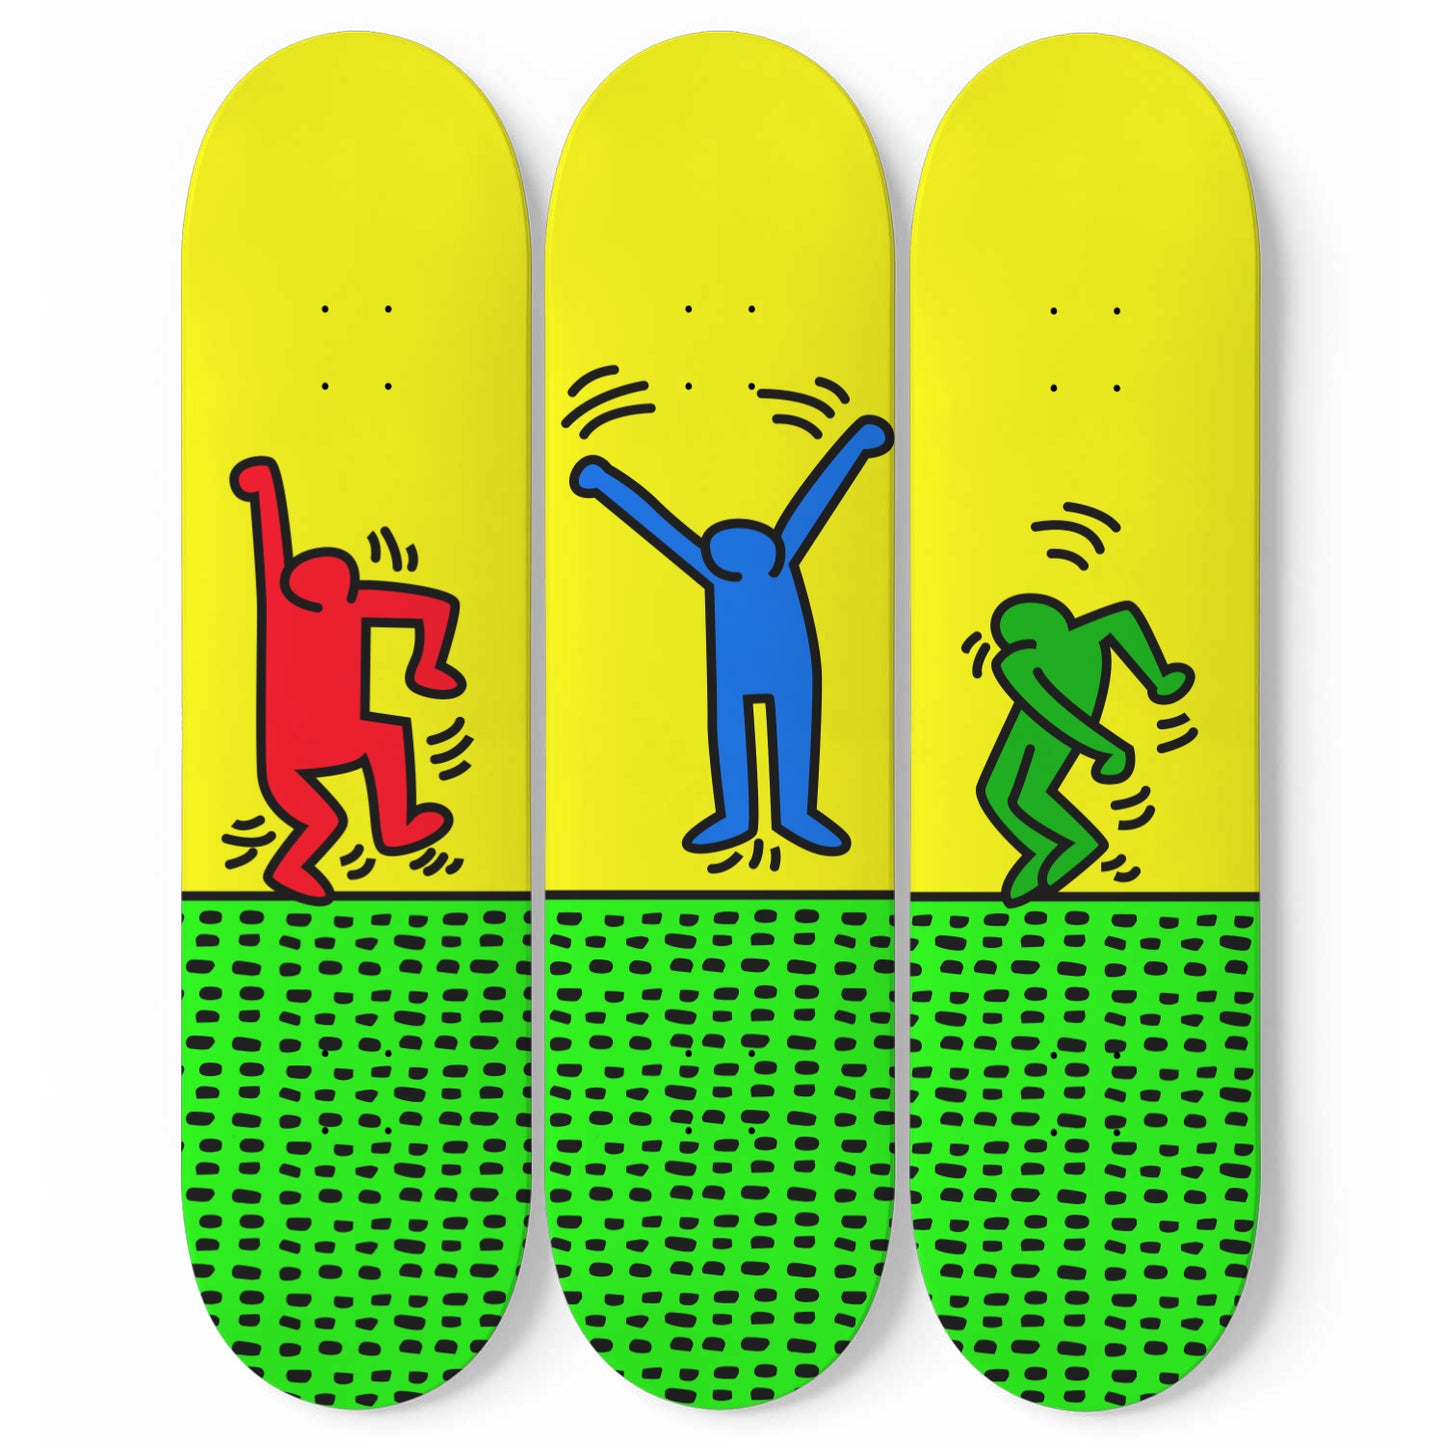 Keith Haring - Let's Dance - 3 Piece Skateboard Wall Art